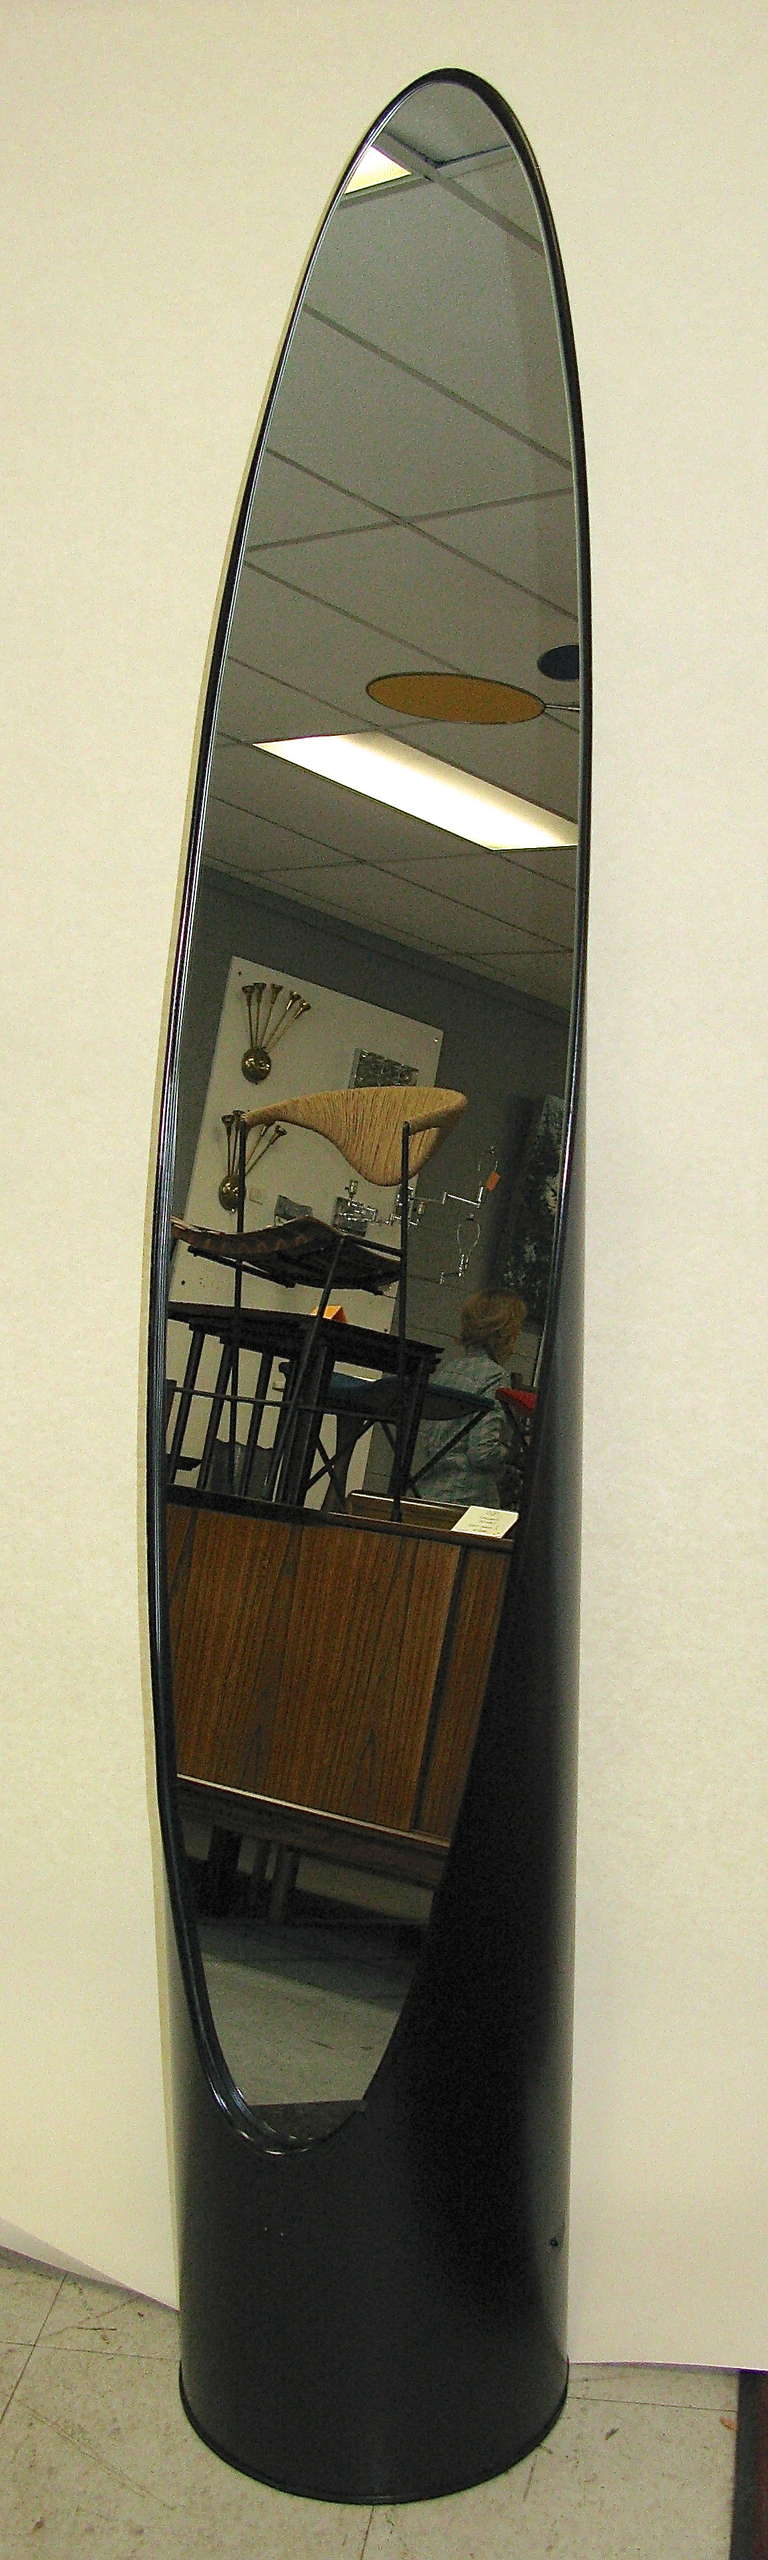 Would make an excellent dressing room accessory or perhaps in a store setting. Very compact size. New mirror. Black paint on metal. Rubber strip around mirror housing and base. Some minor dents and scuffs. Some surface rust along bottom. Really cool